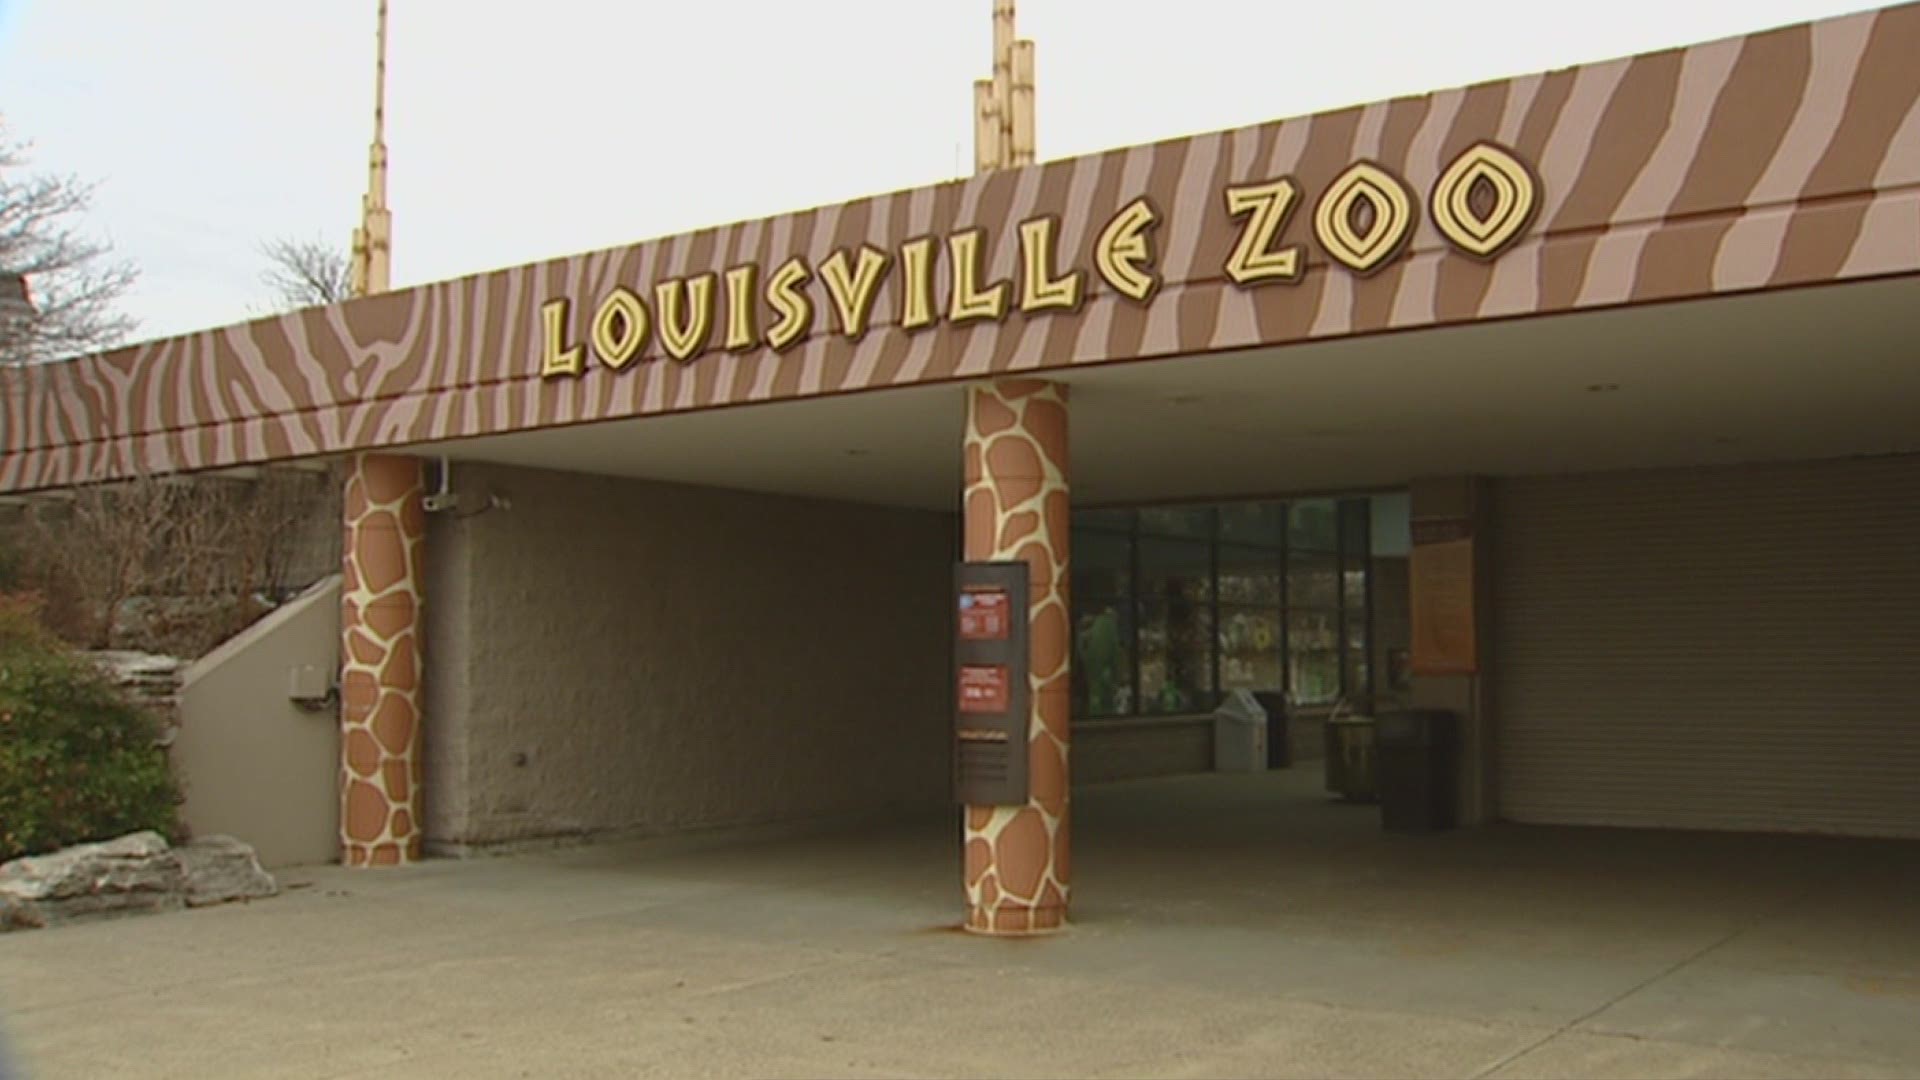 The COVID vaccinations would be for the apes and big cats, the Zoo said.